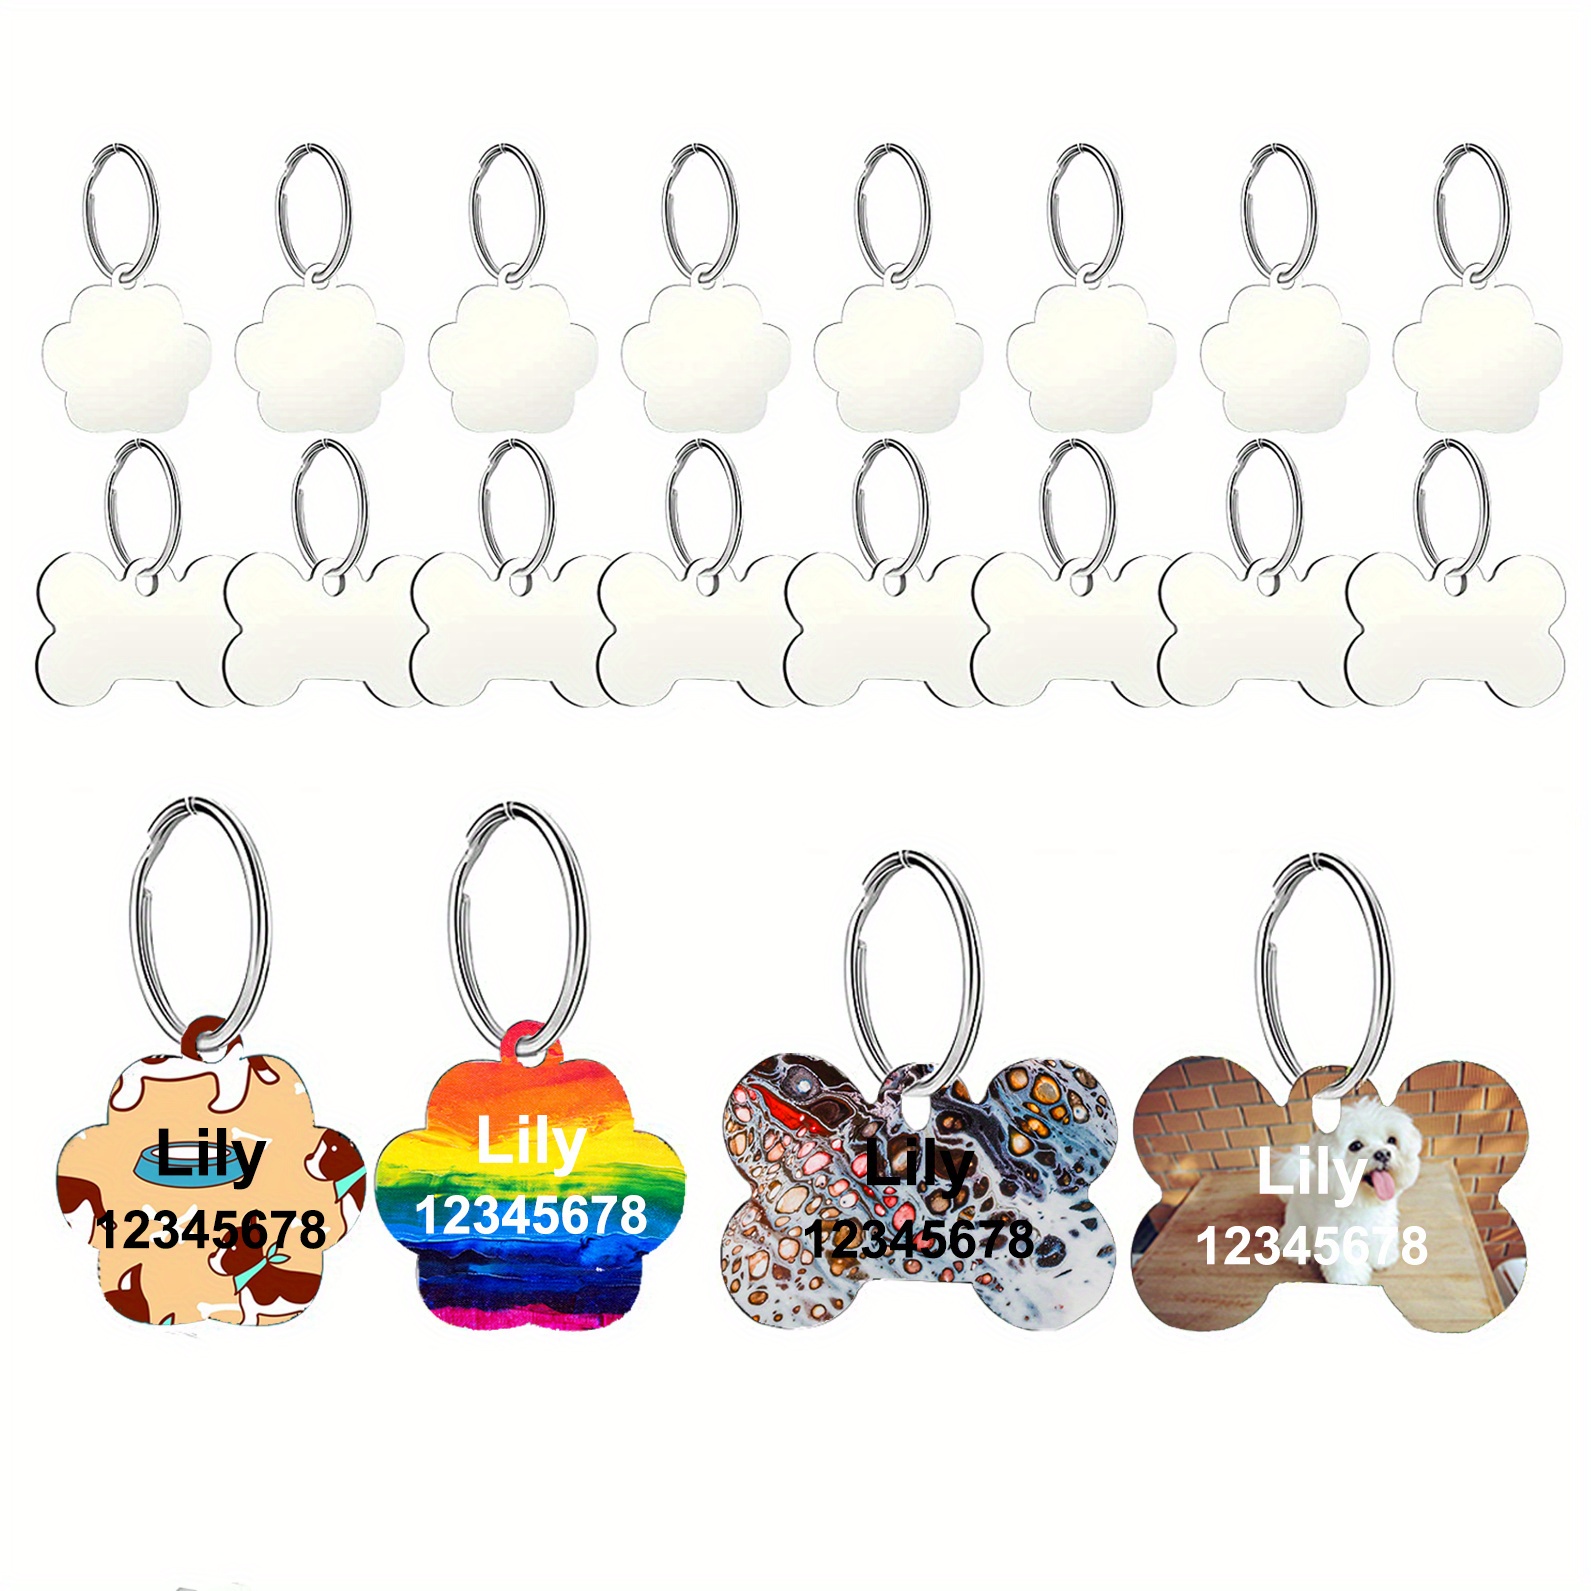 Sublimation Blank Metal Dog Tags for Sublimation Printing by Heat transfer